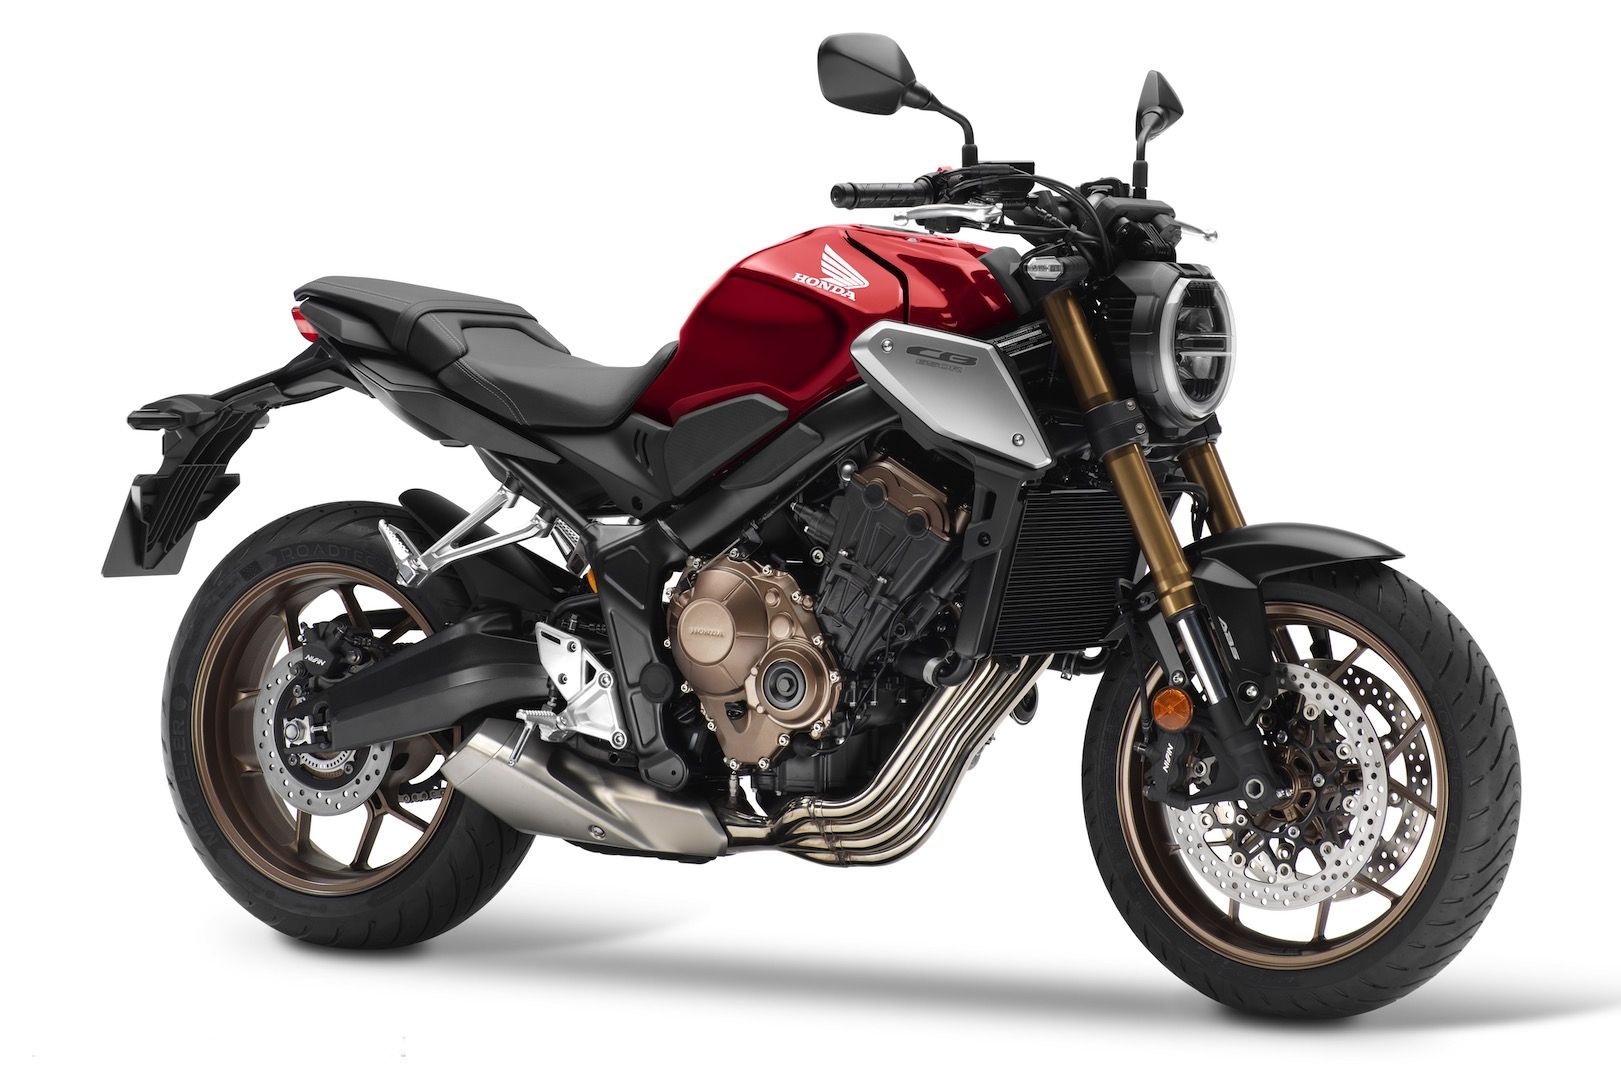 Honda CB650R First Look (8 Fast Facts)